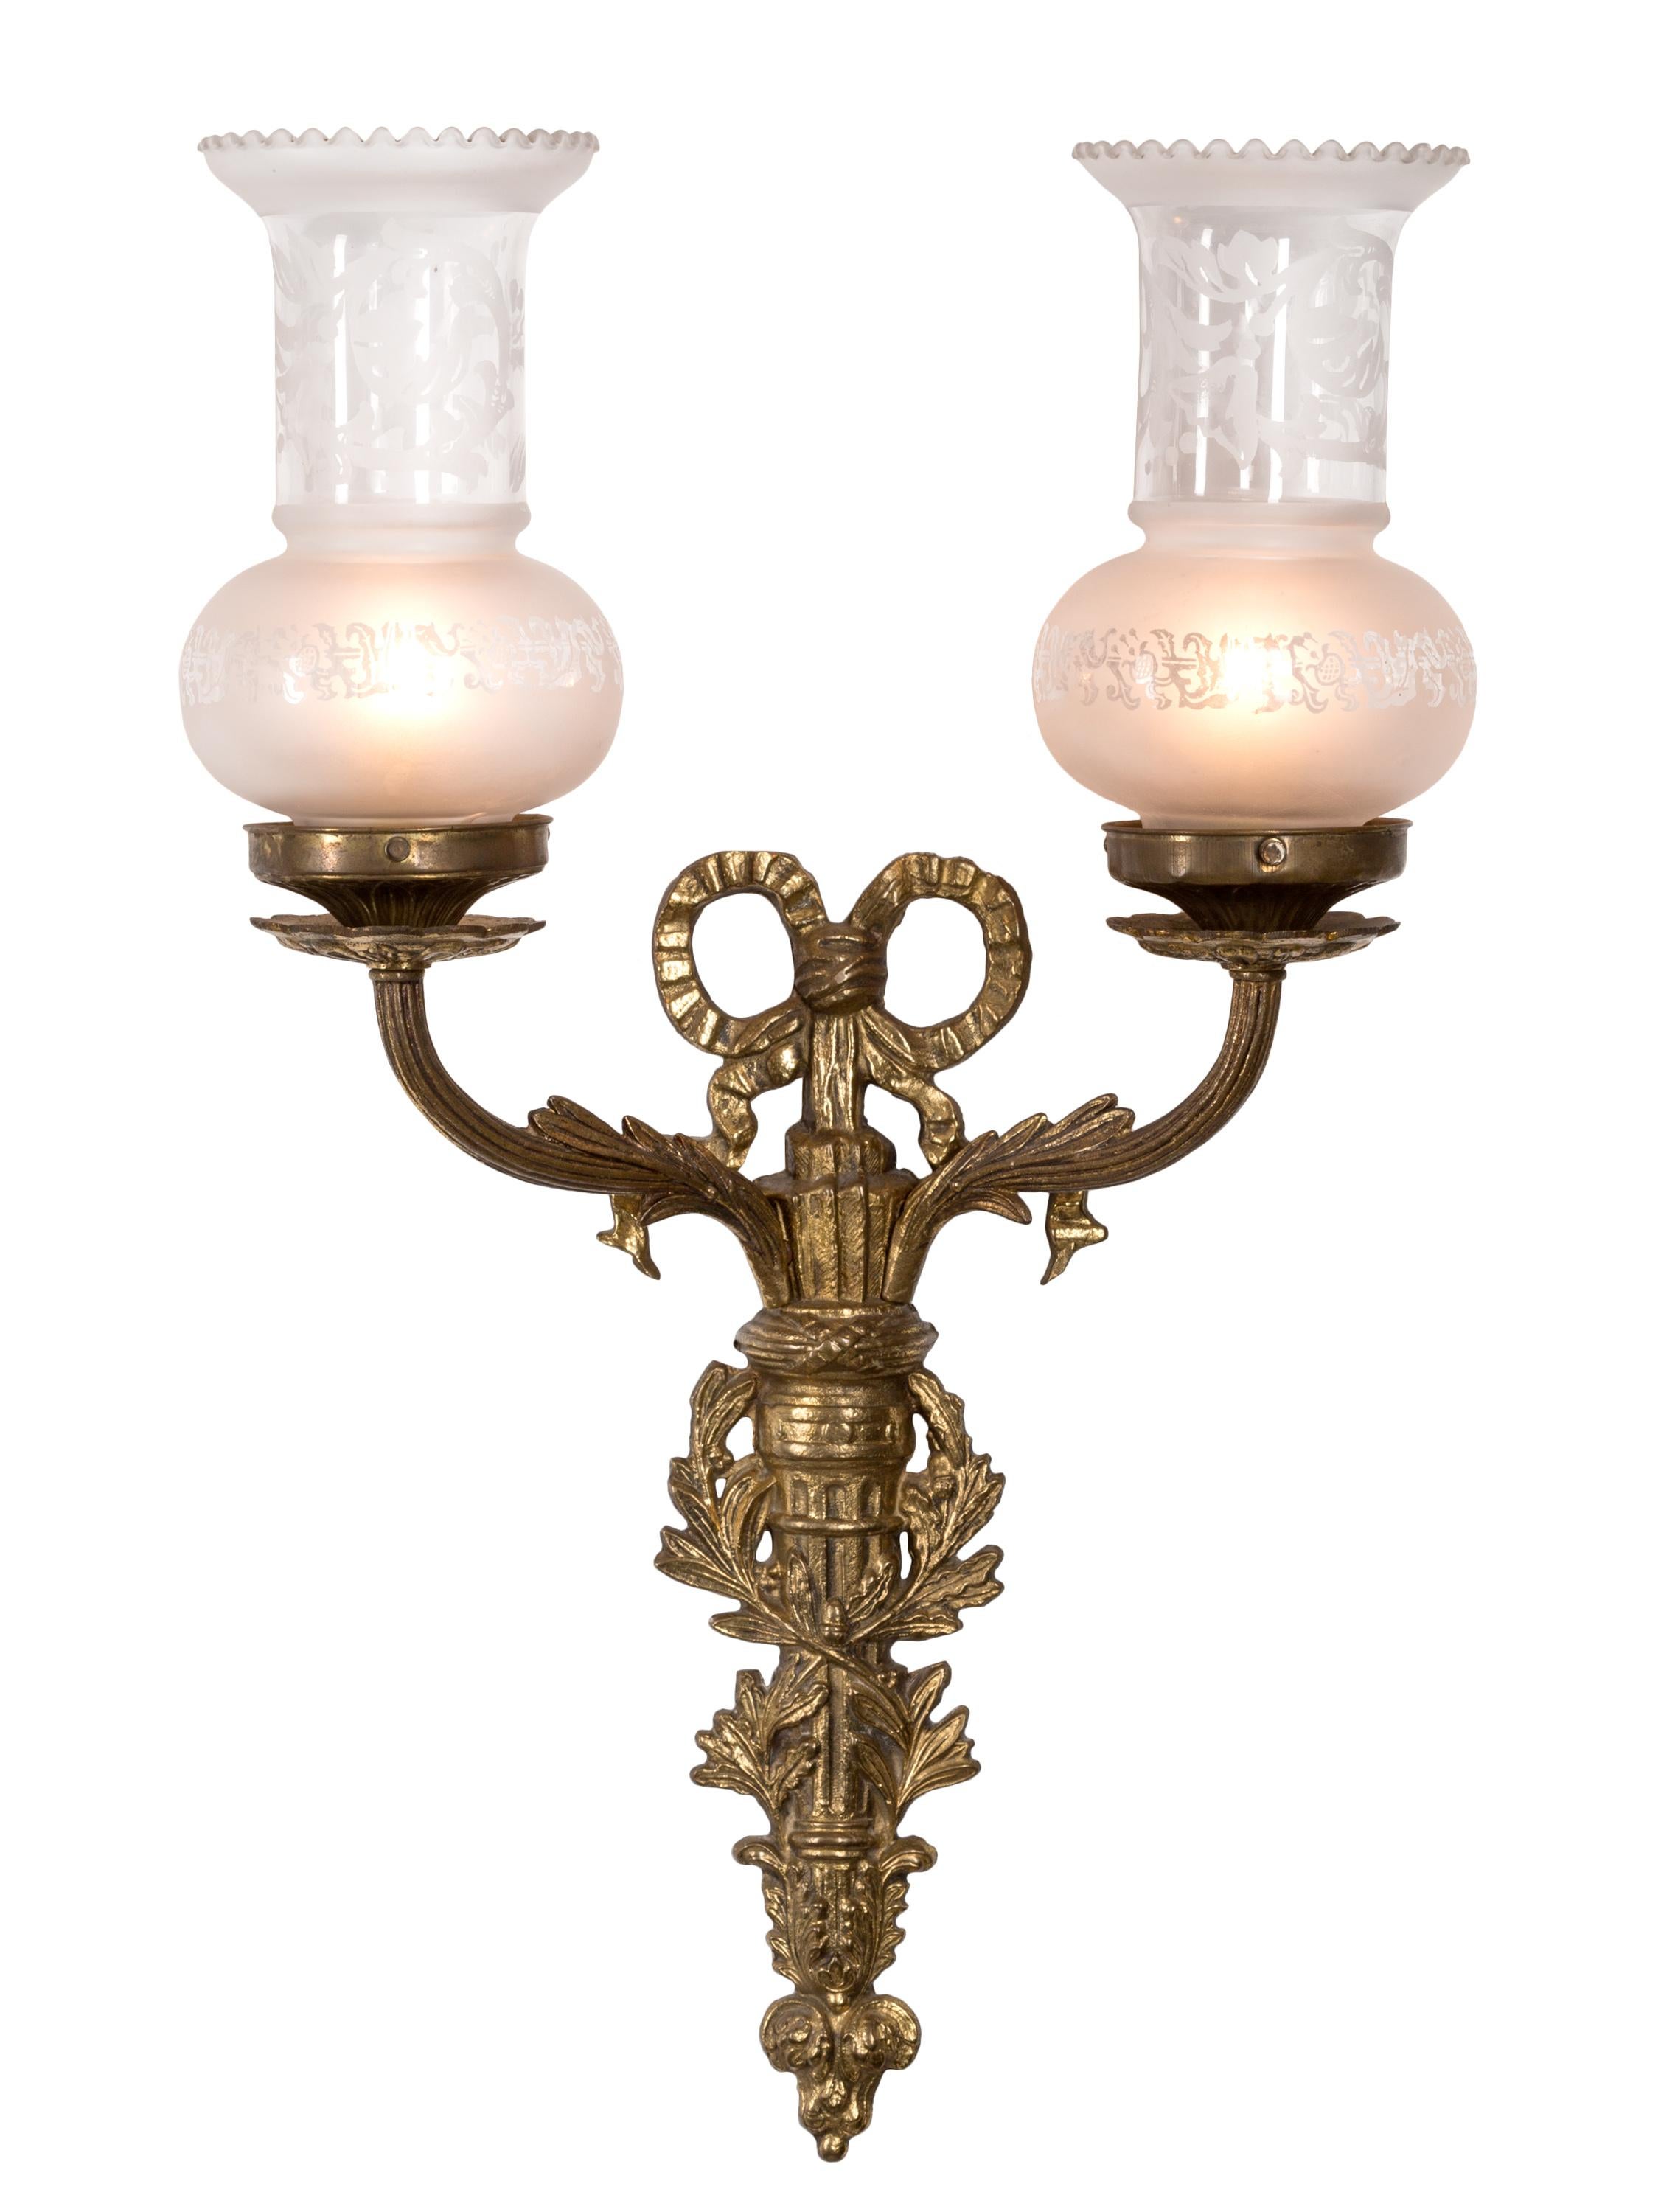 These 19th century French bronze wall sconces or appliqués display a variety of the neoclassical elements found in the Louis XVI style. The central vertical of the sconces seems to mix the forms of both a torch and archer's quiver, the 